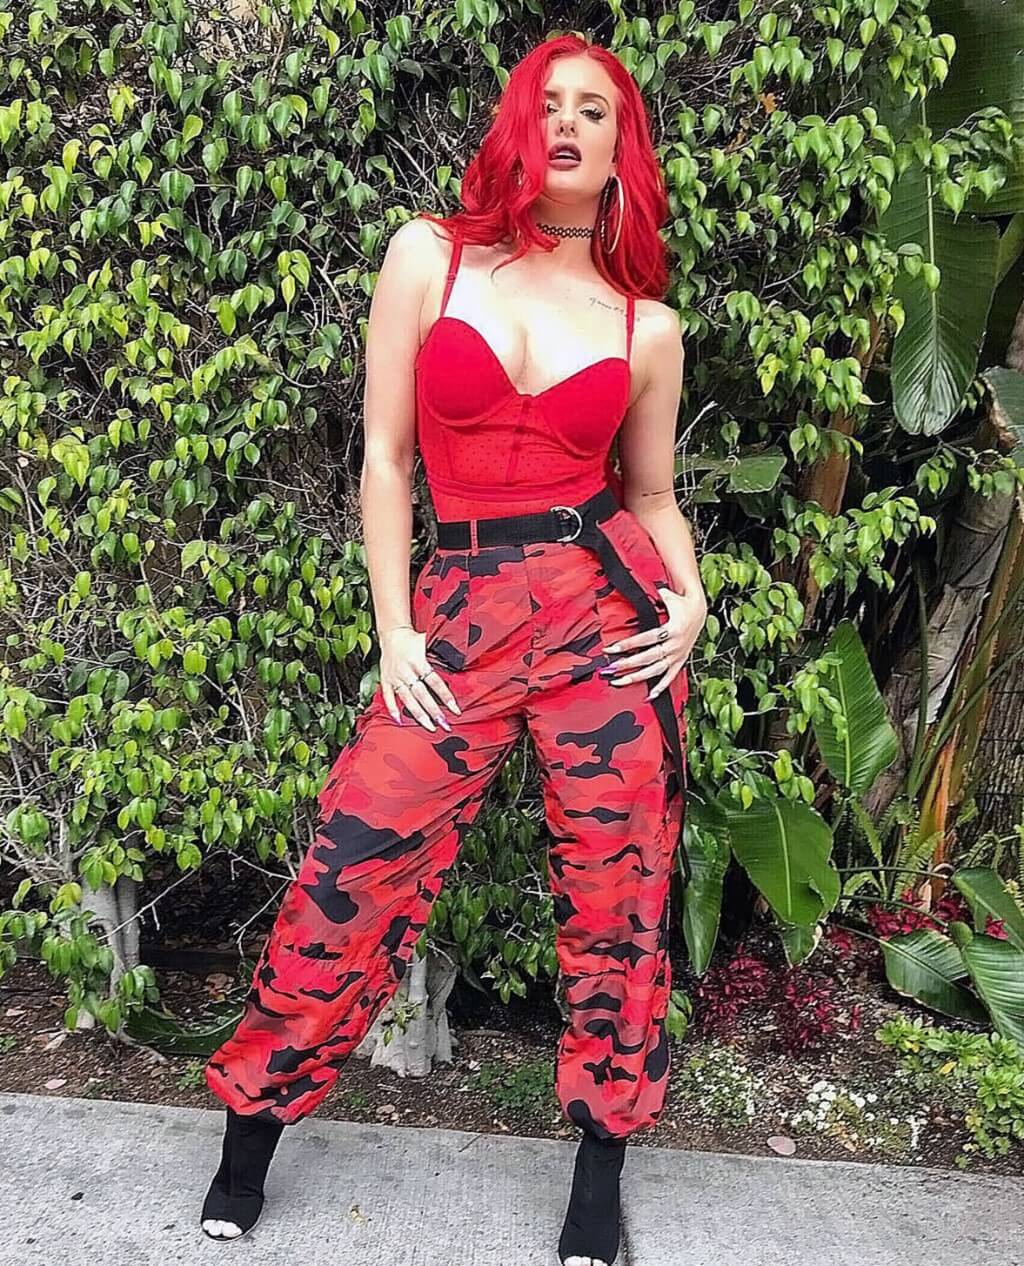 Like the Christmas traditions, Justina Valentine can’t stop being sexy. 